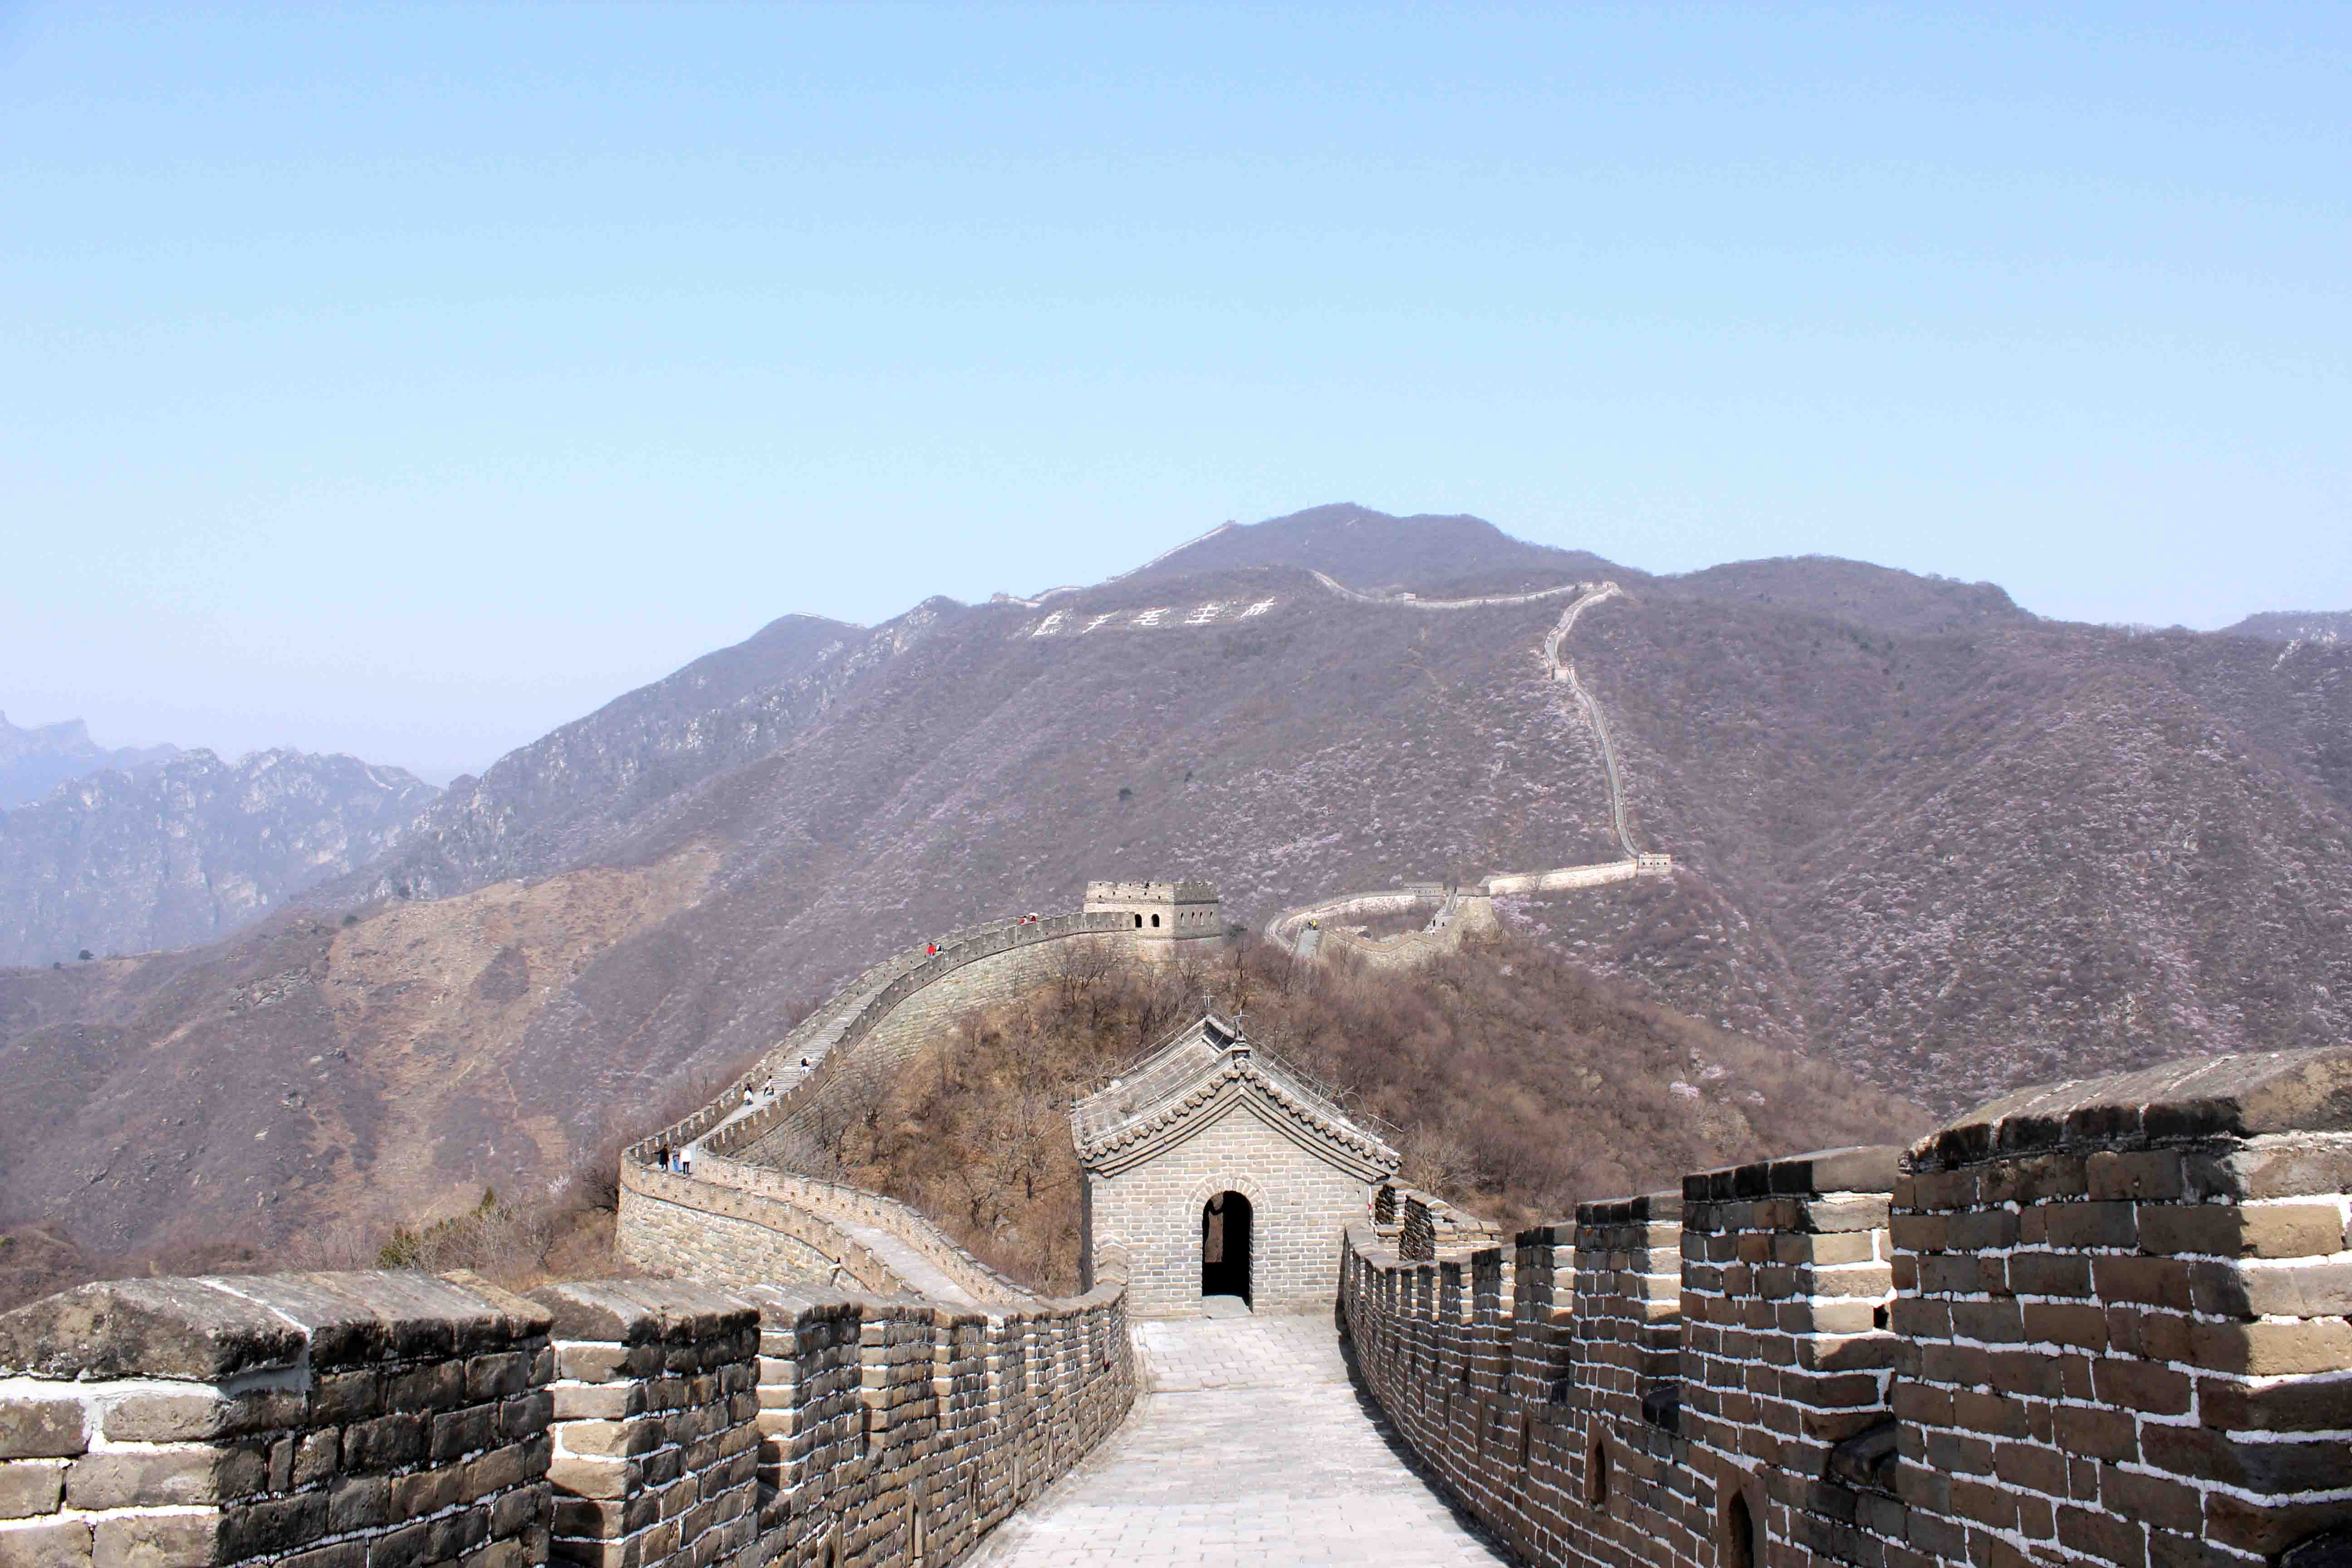 Mutianyu is a lesser touristy section of the Great Wall than other parts